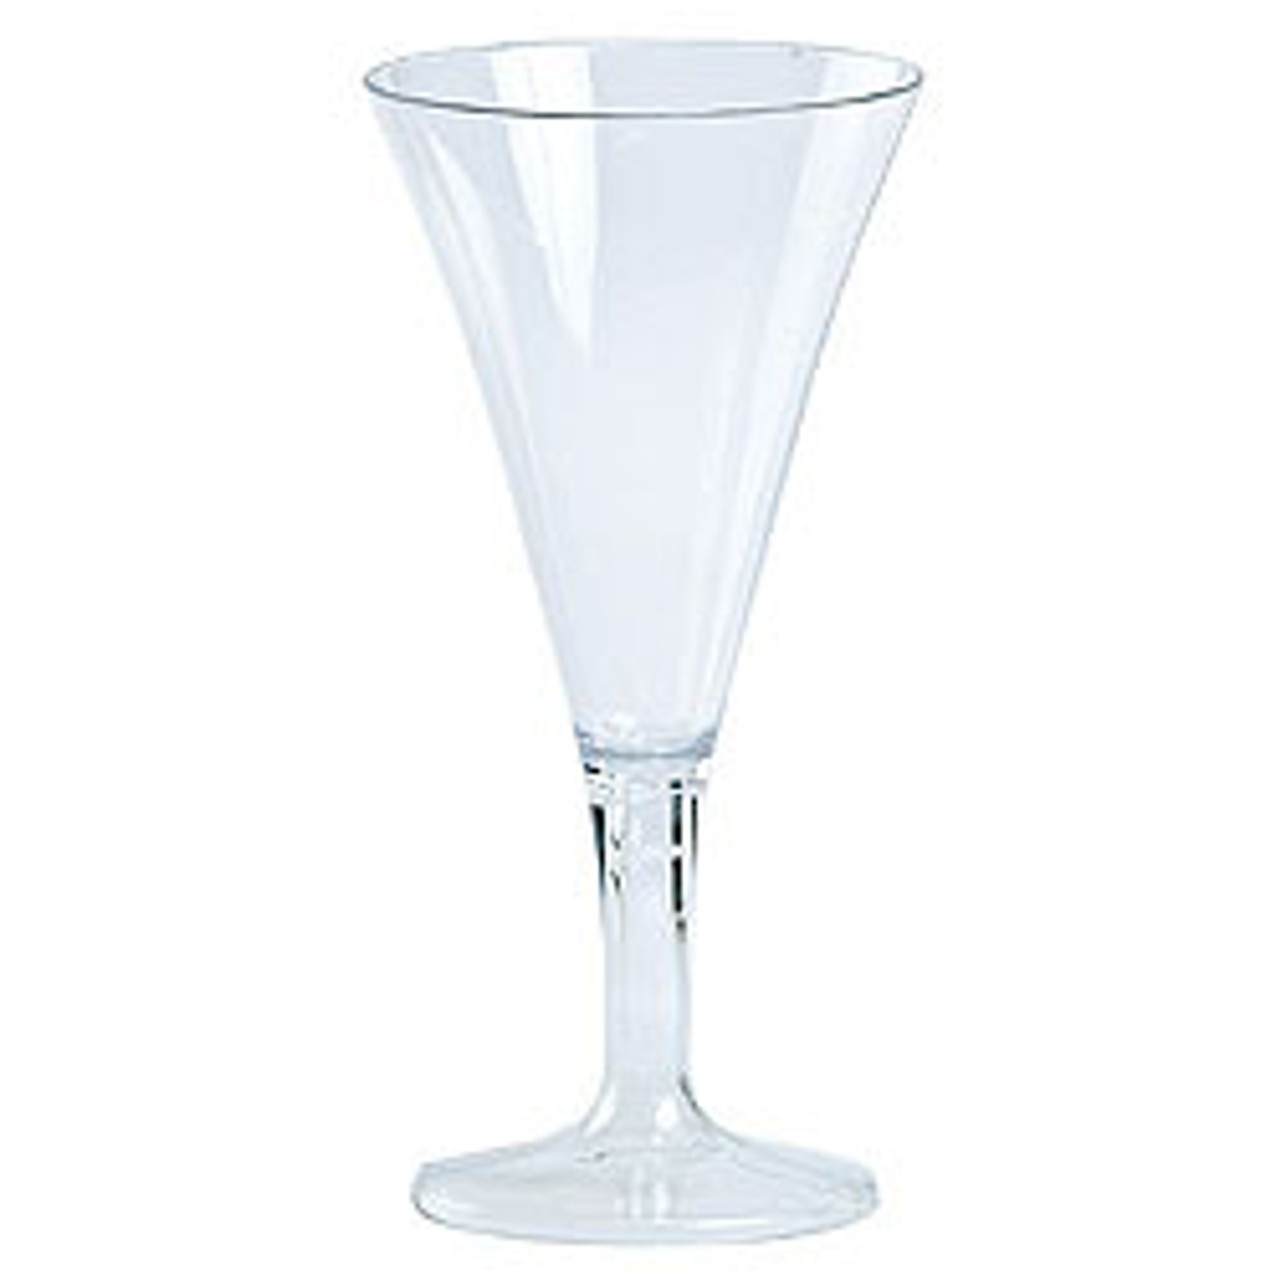 https://cdn11.bigcommerce.com/s-hgqmwywp99/images/stencil/1280x1280/products/49806/44593/clear-plastic-mini-martini-glass-10ct-16__86384.1675880347.jpg?c=1?imbypass=on